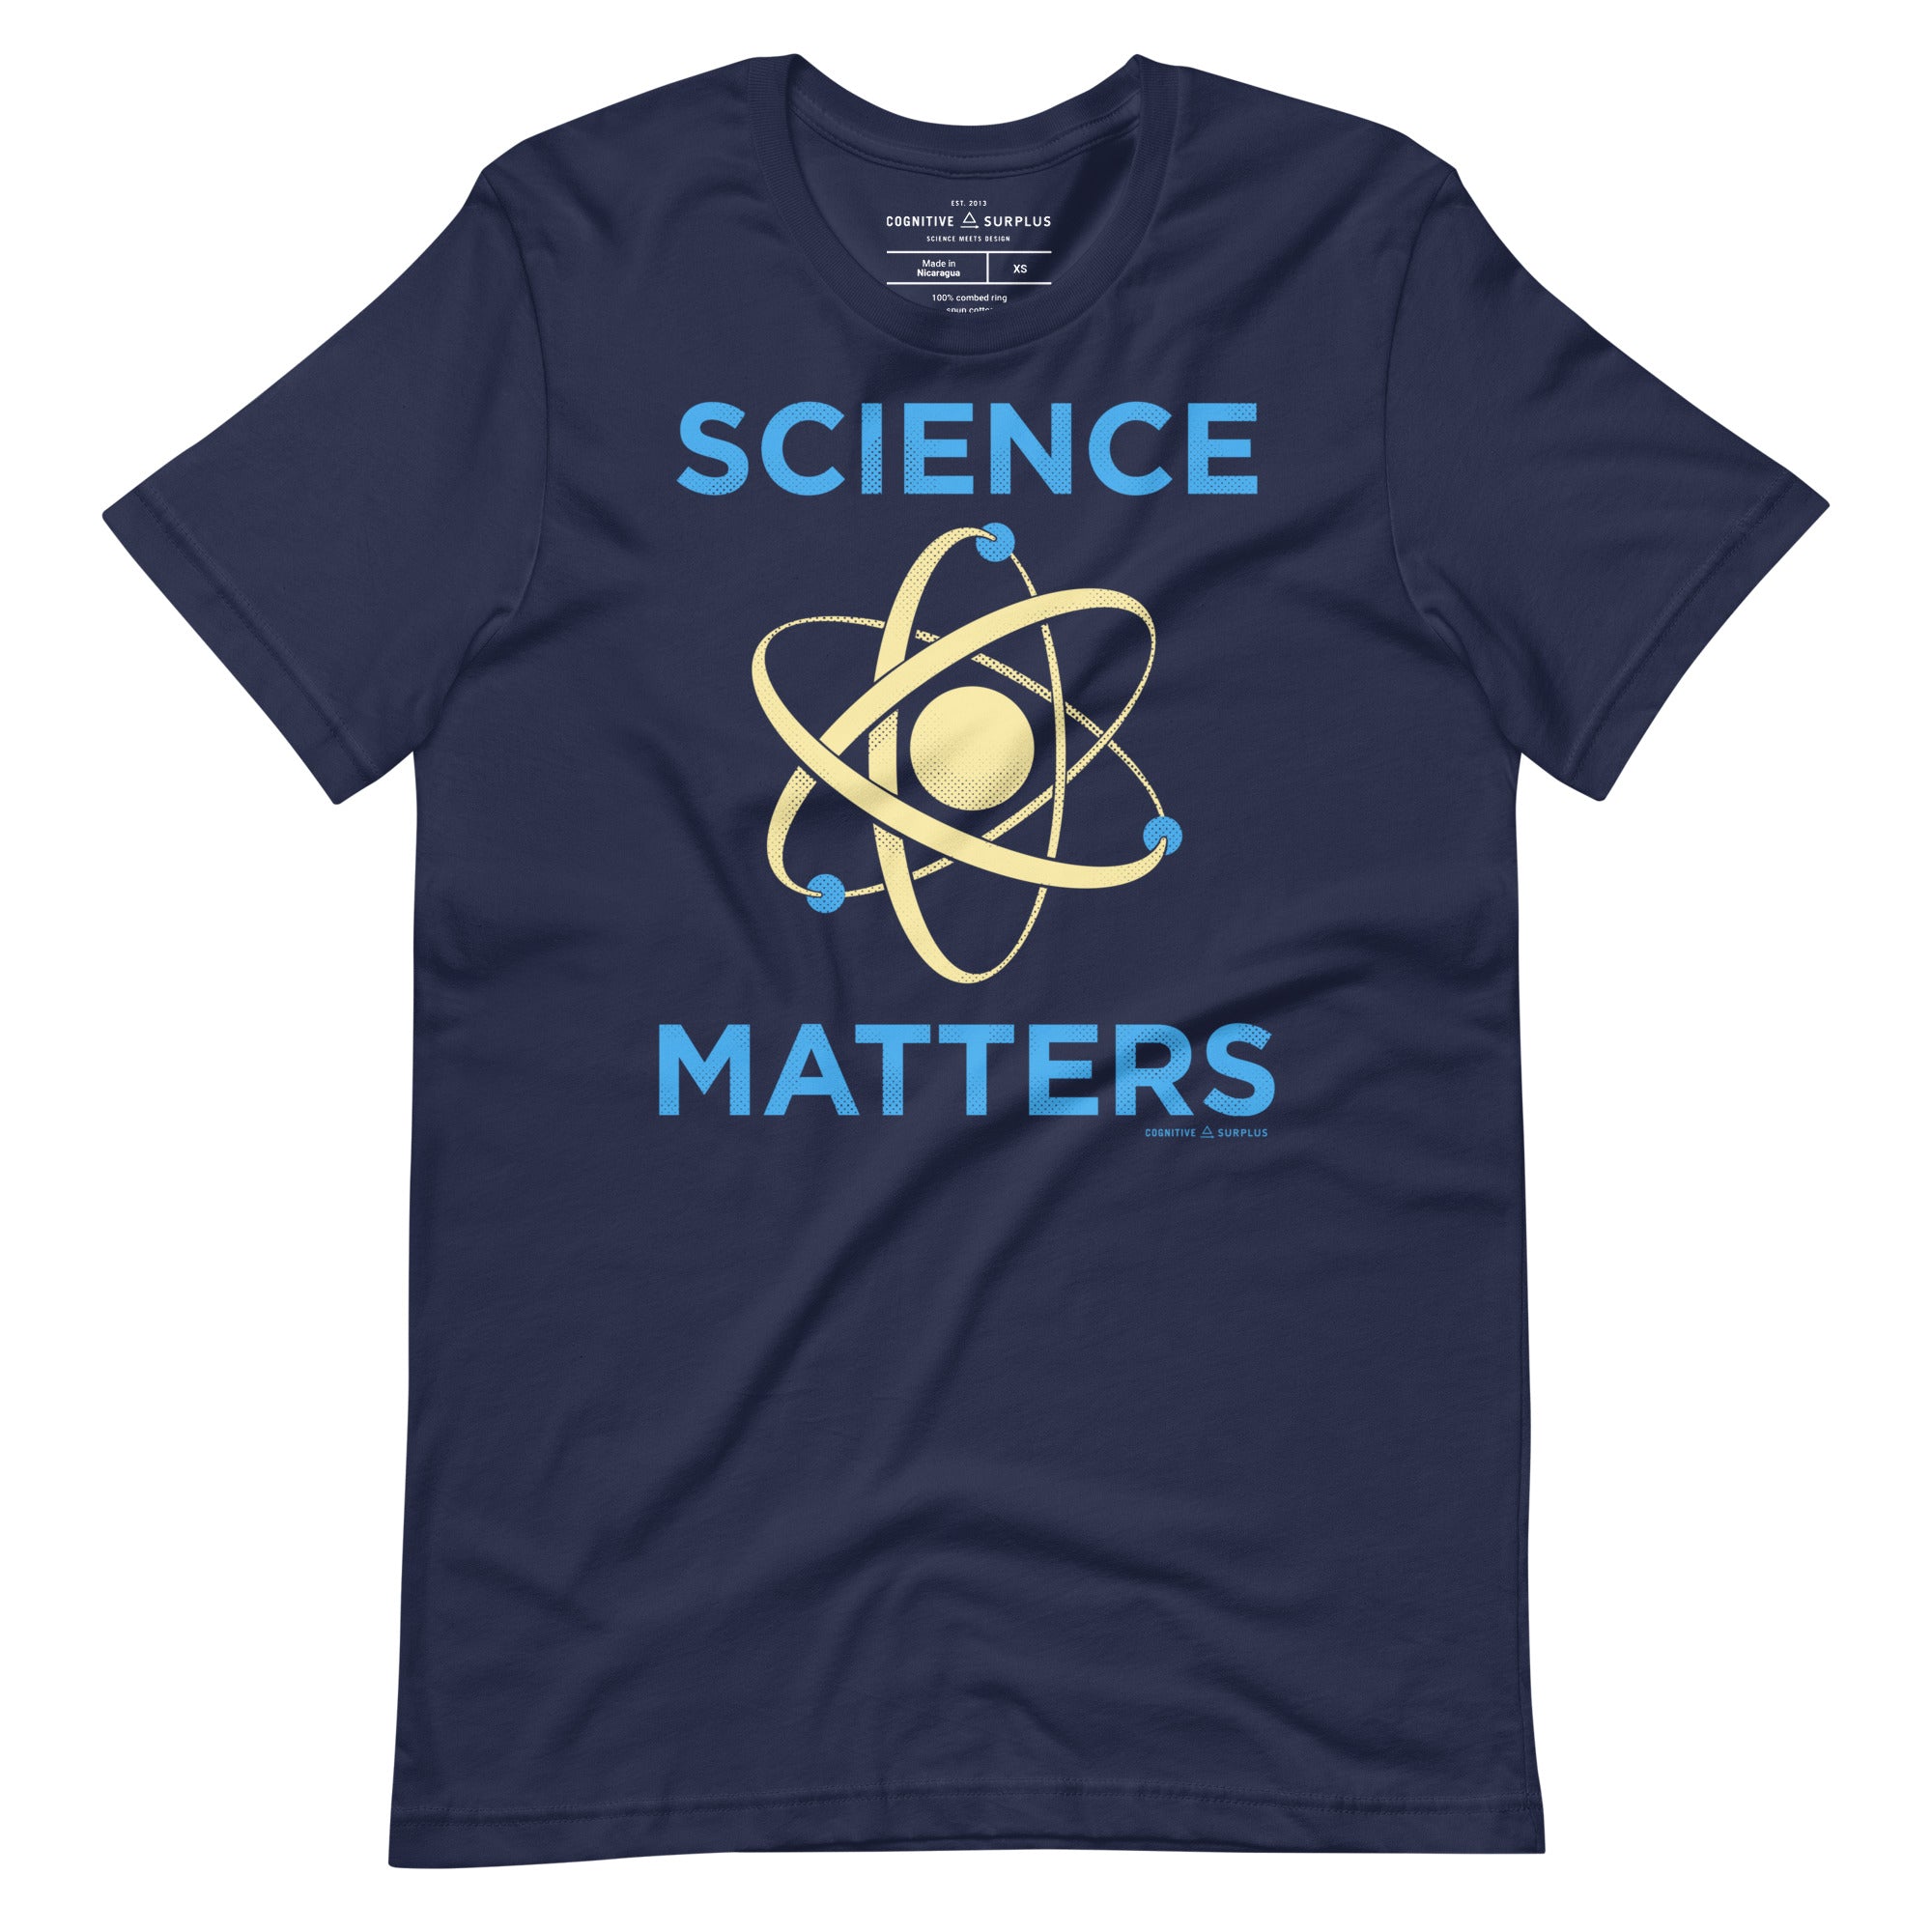 Science Matters Graphic Tee